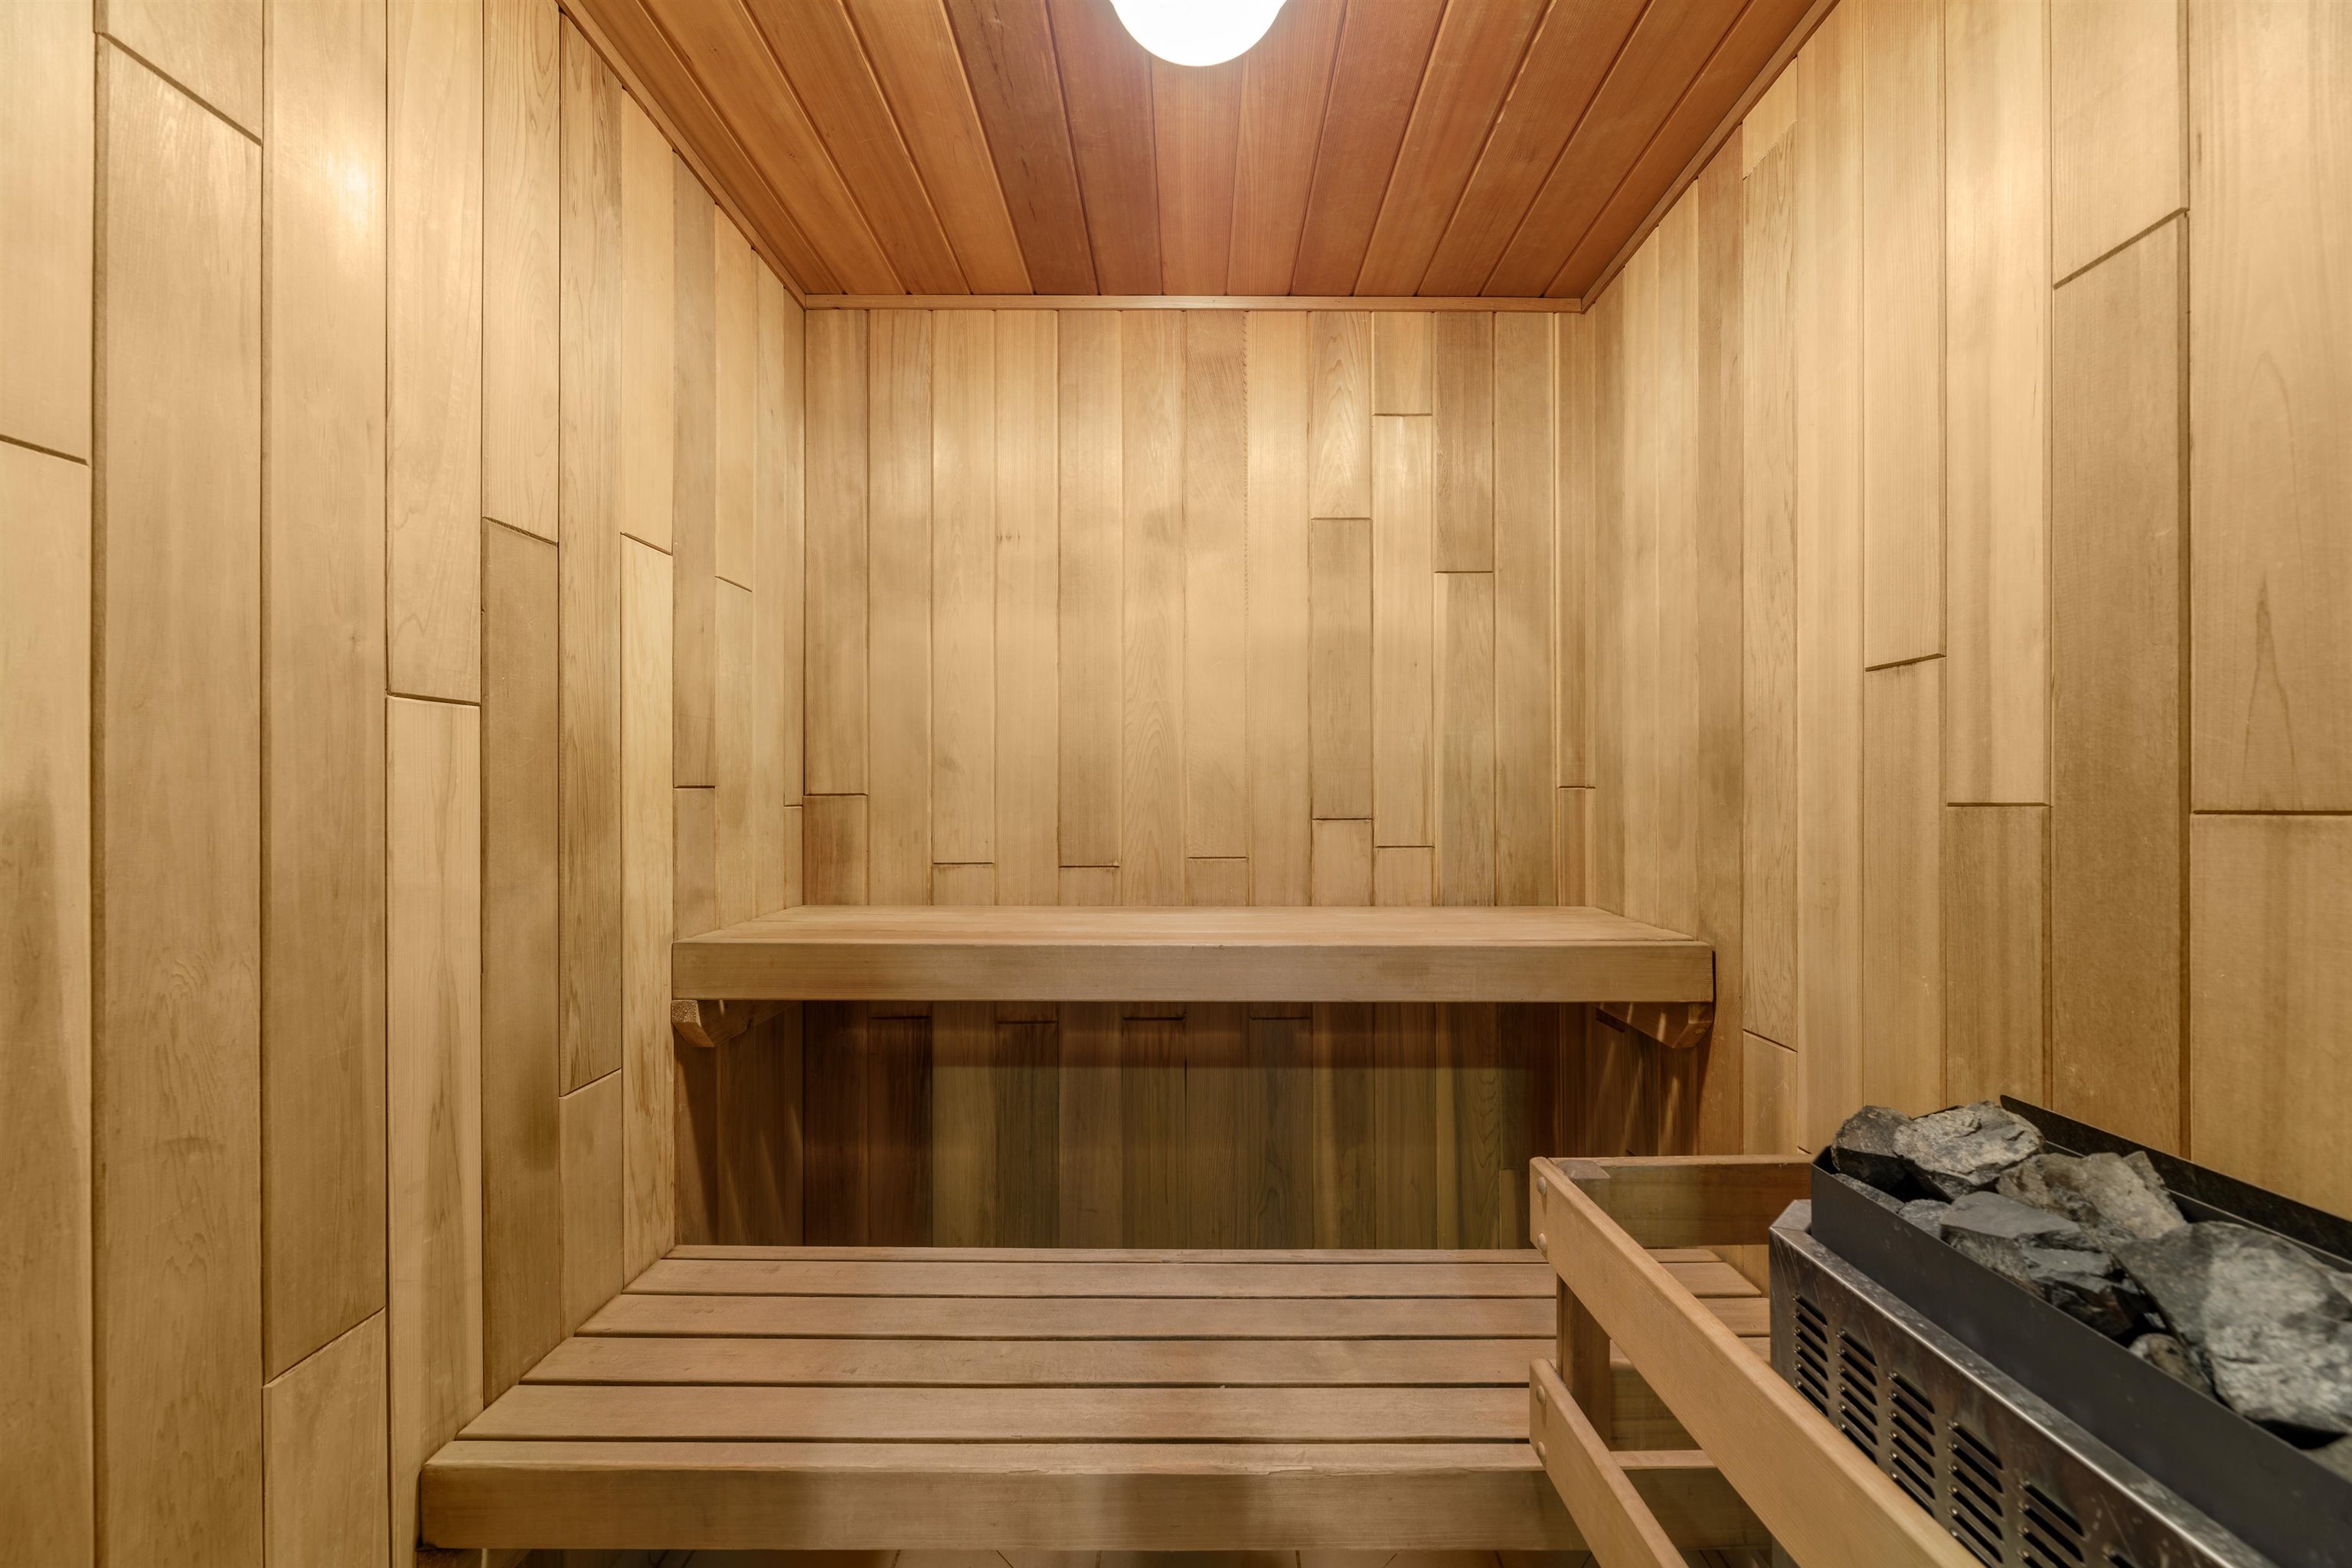 Add to your wellness with a sauna!